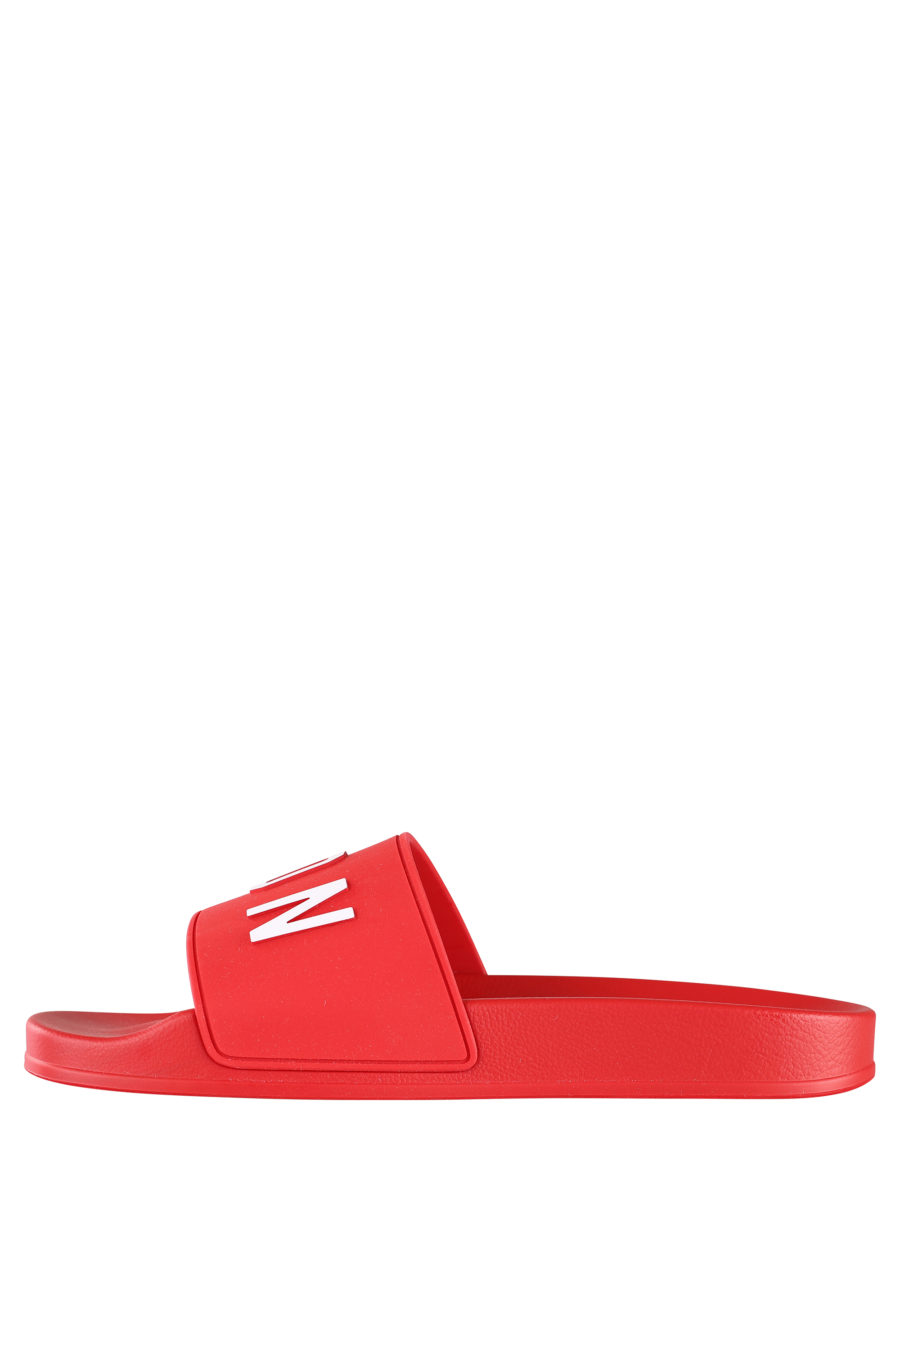 Red flip flops with white "icon" logo - IMG 9944